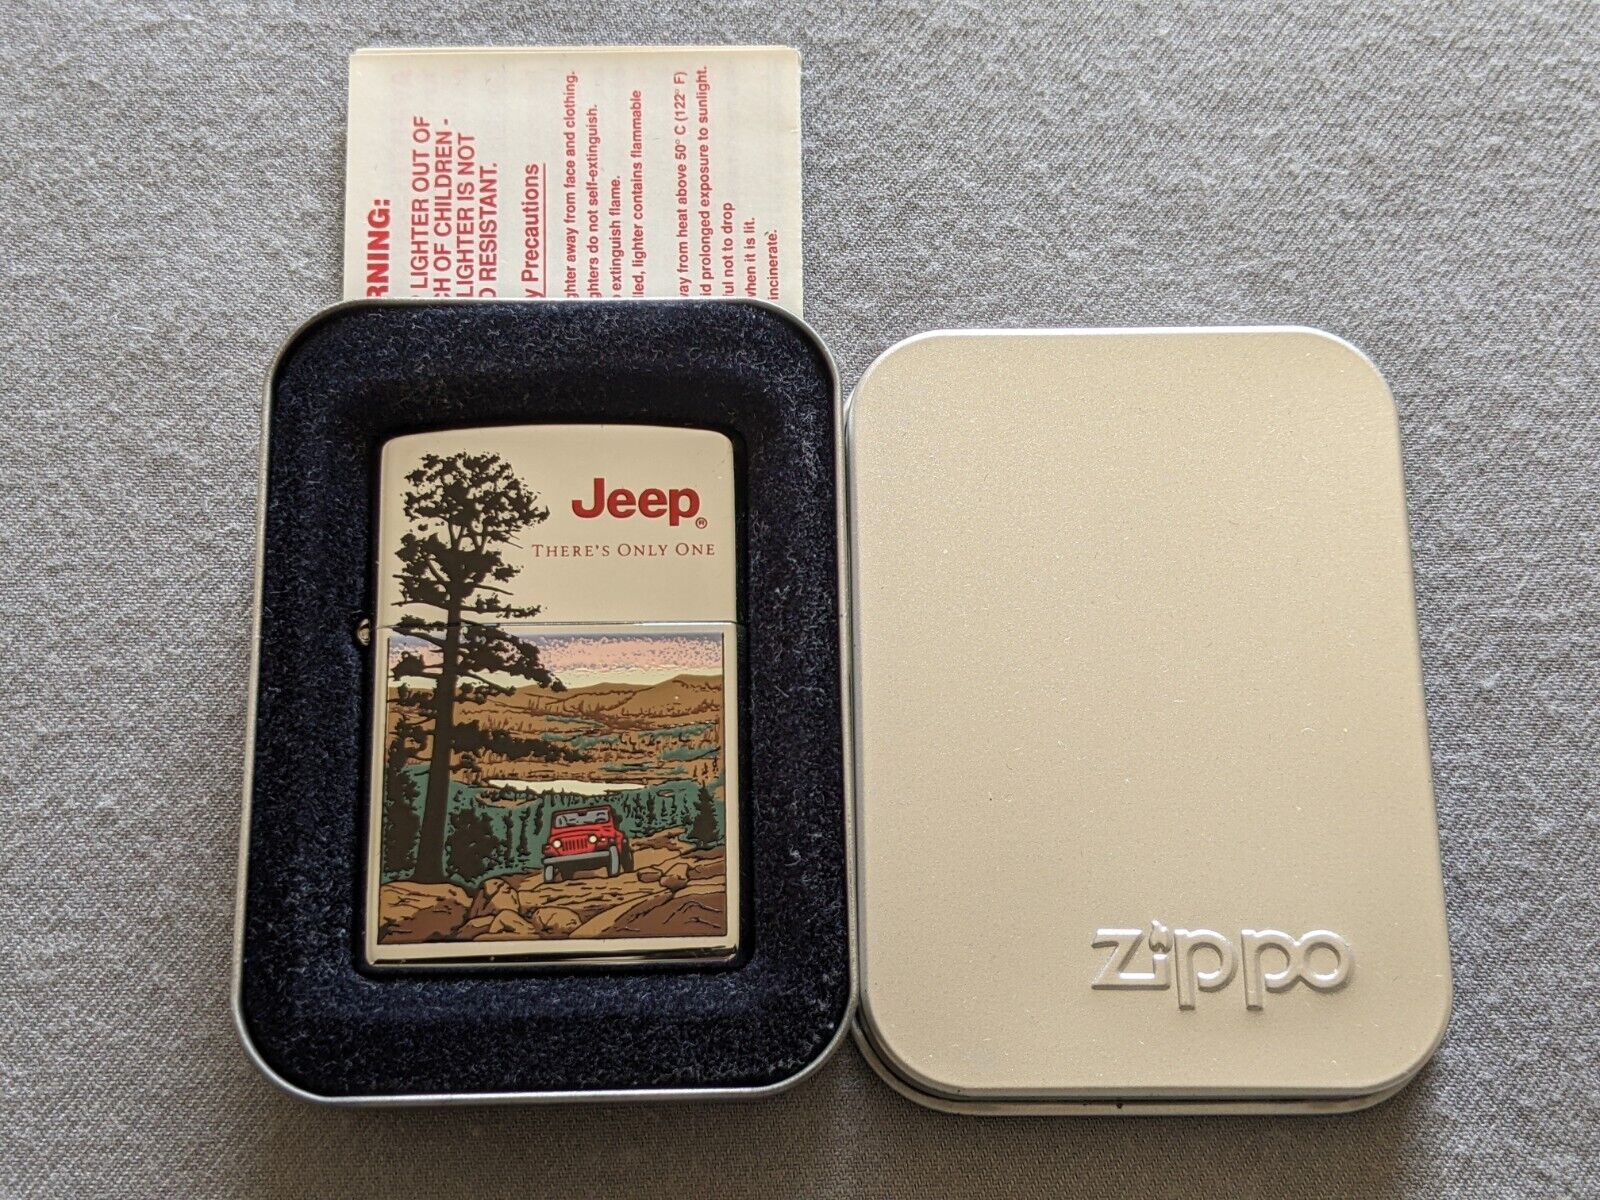 VINTAGE 1997 JEEP THERE’S ONLY ONE HIGH POLISH ZIPPO LIGHTER MIB RARE